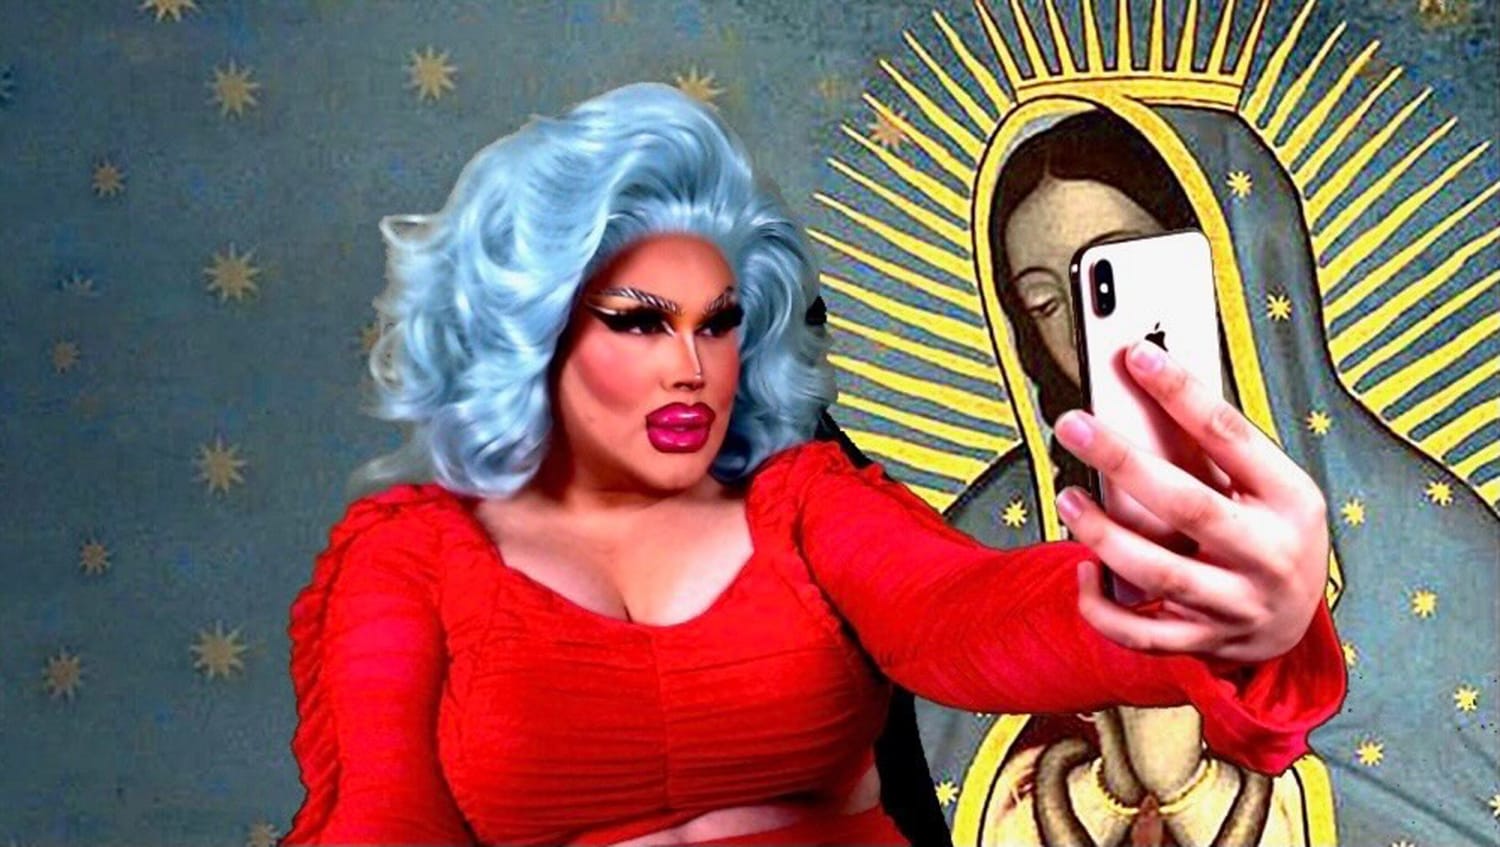 Drag queens are being swatted while streaming on Twitch. They want it to  stop.